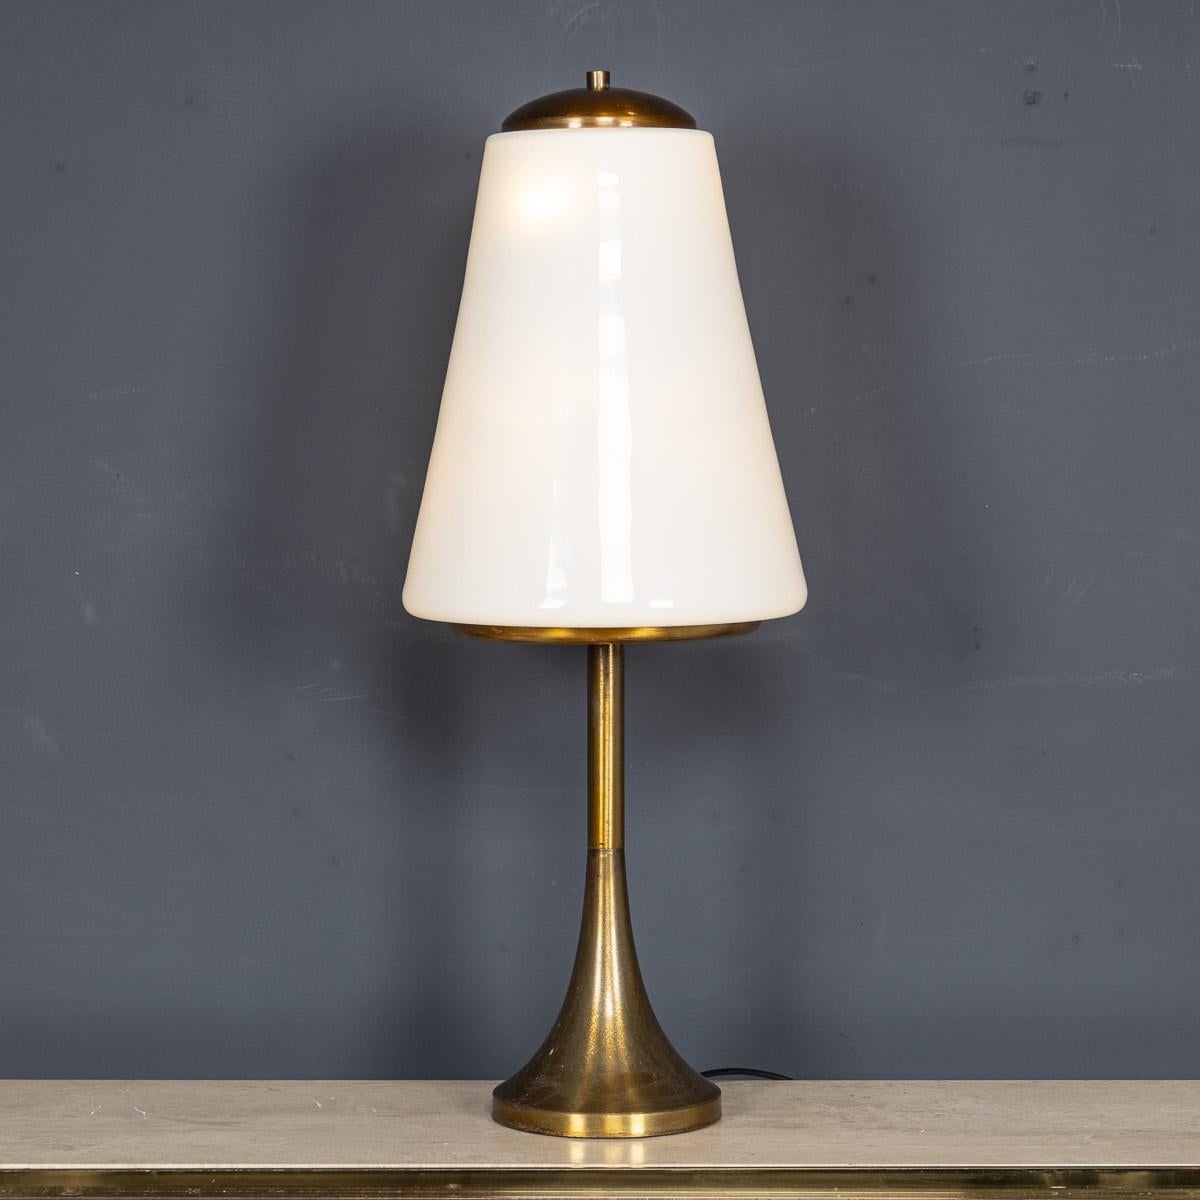 A Vintage 20th Century lamp crafted in Italy, featuring brass accents and white opaque glass, dating back to the 1970s. The shade accommodates six bulbs illuminating any space with grace. A testament to the elegance of Italian design, this lamp